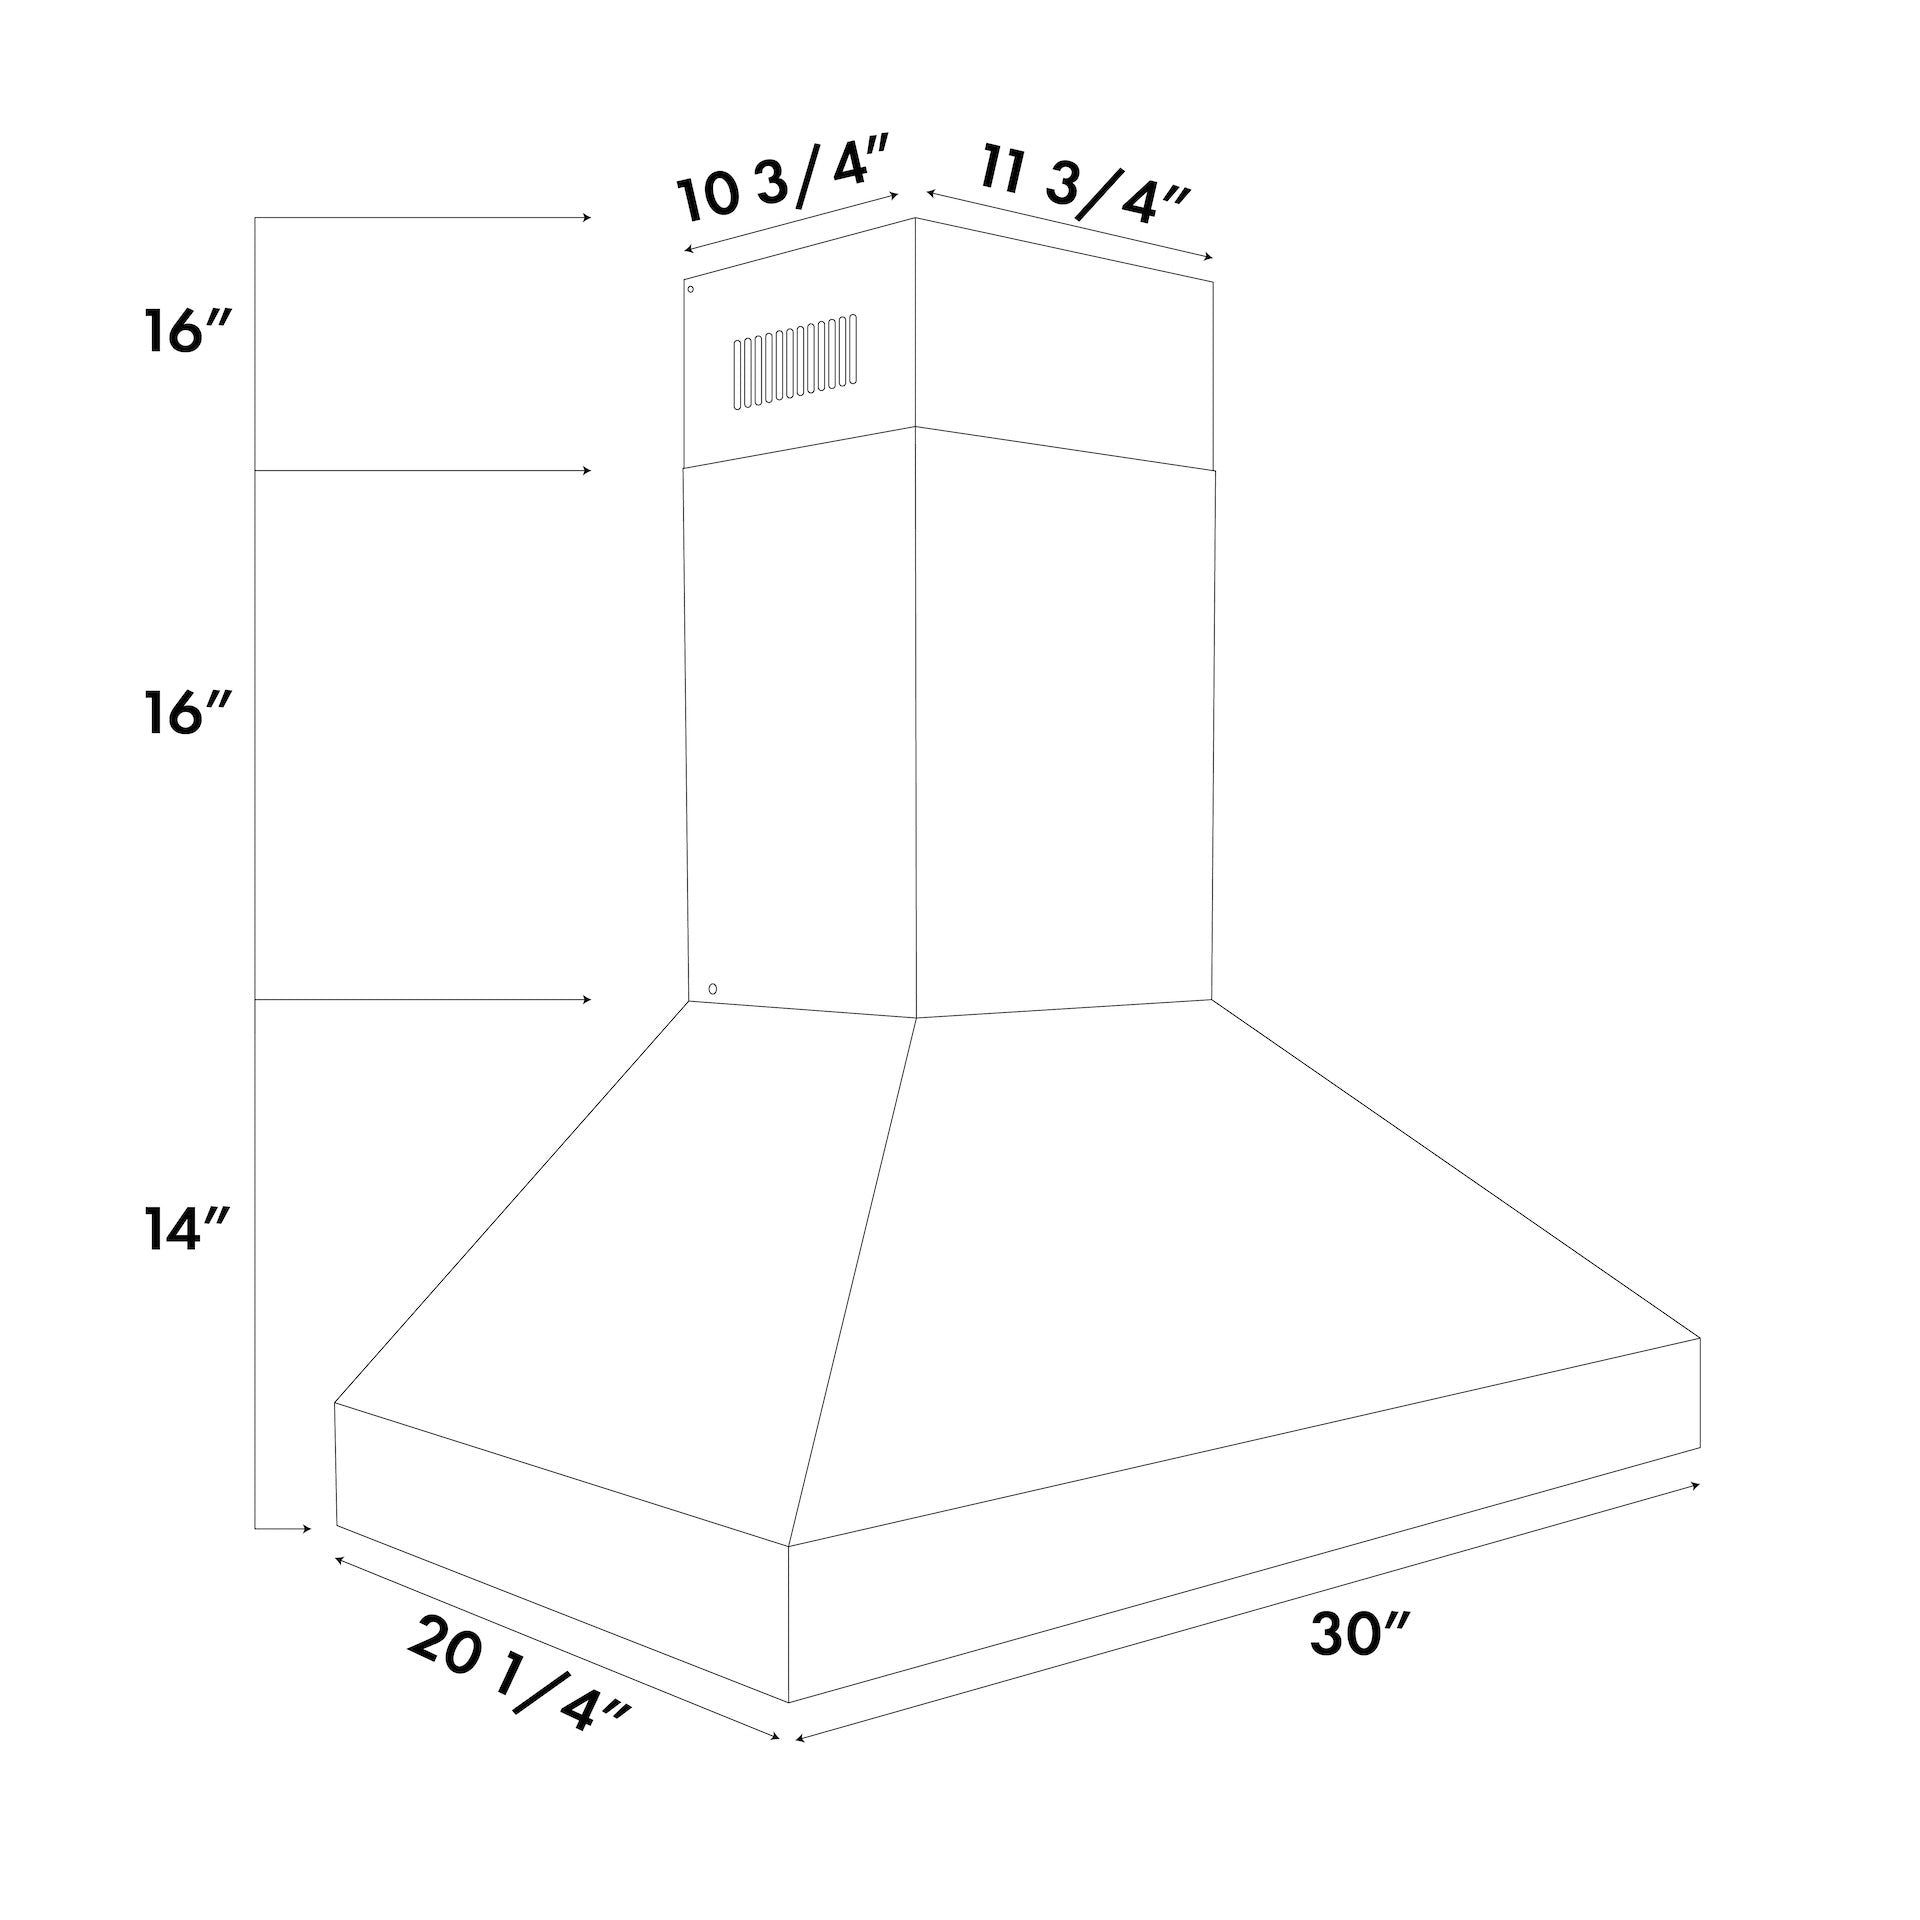 ZLINE Professional Convertible Vent Wall Mount Range Hood in Stainless Steel (597) dimensional diagram with measurements.